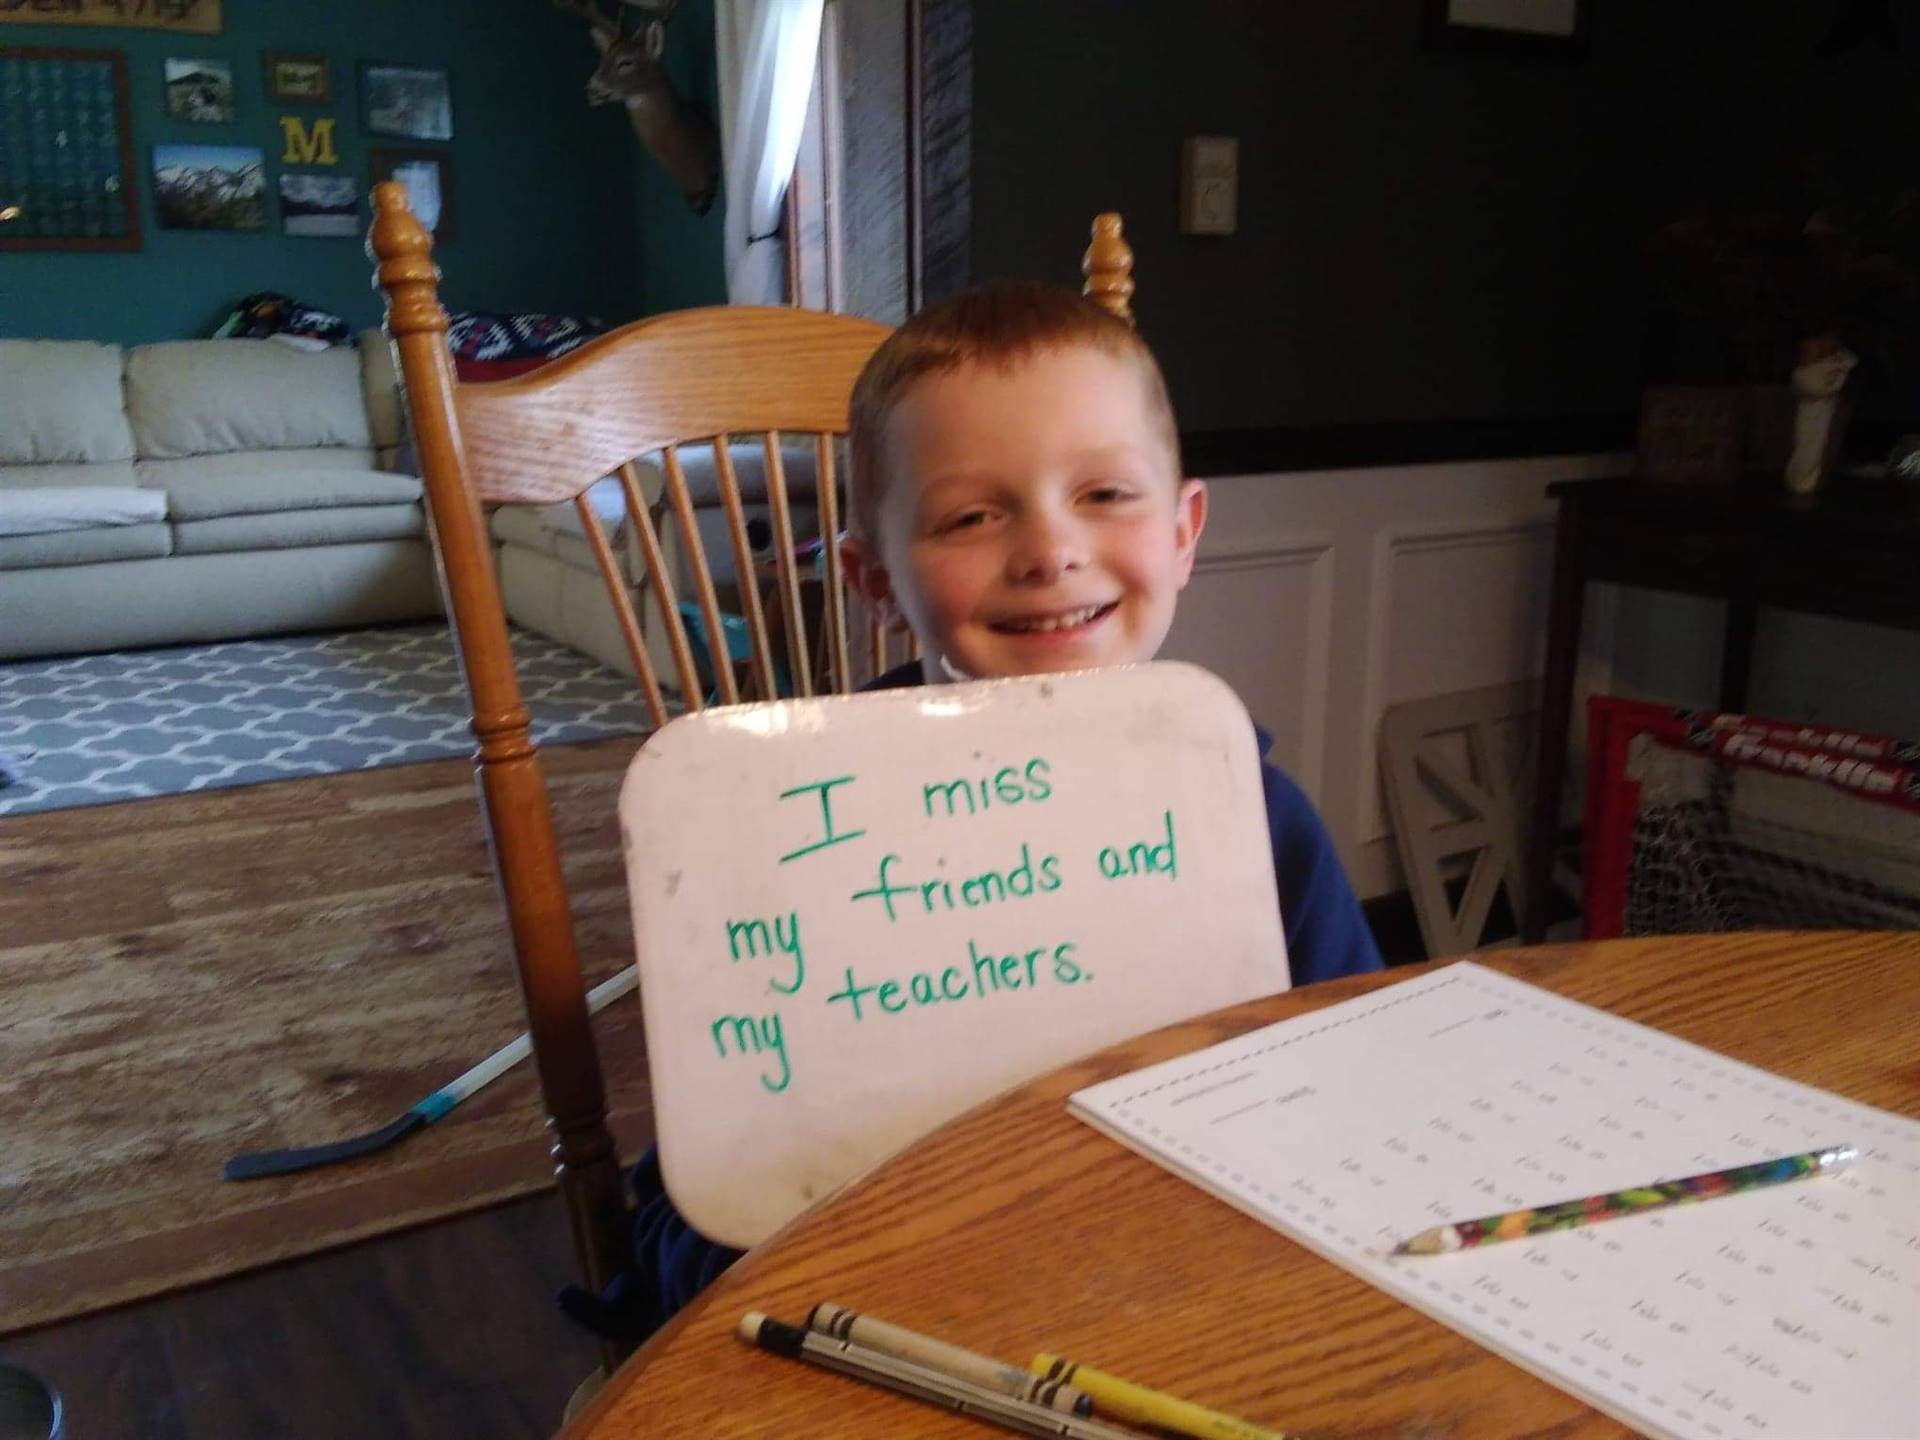 A child with "I miss my teachers and friends" sign